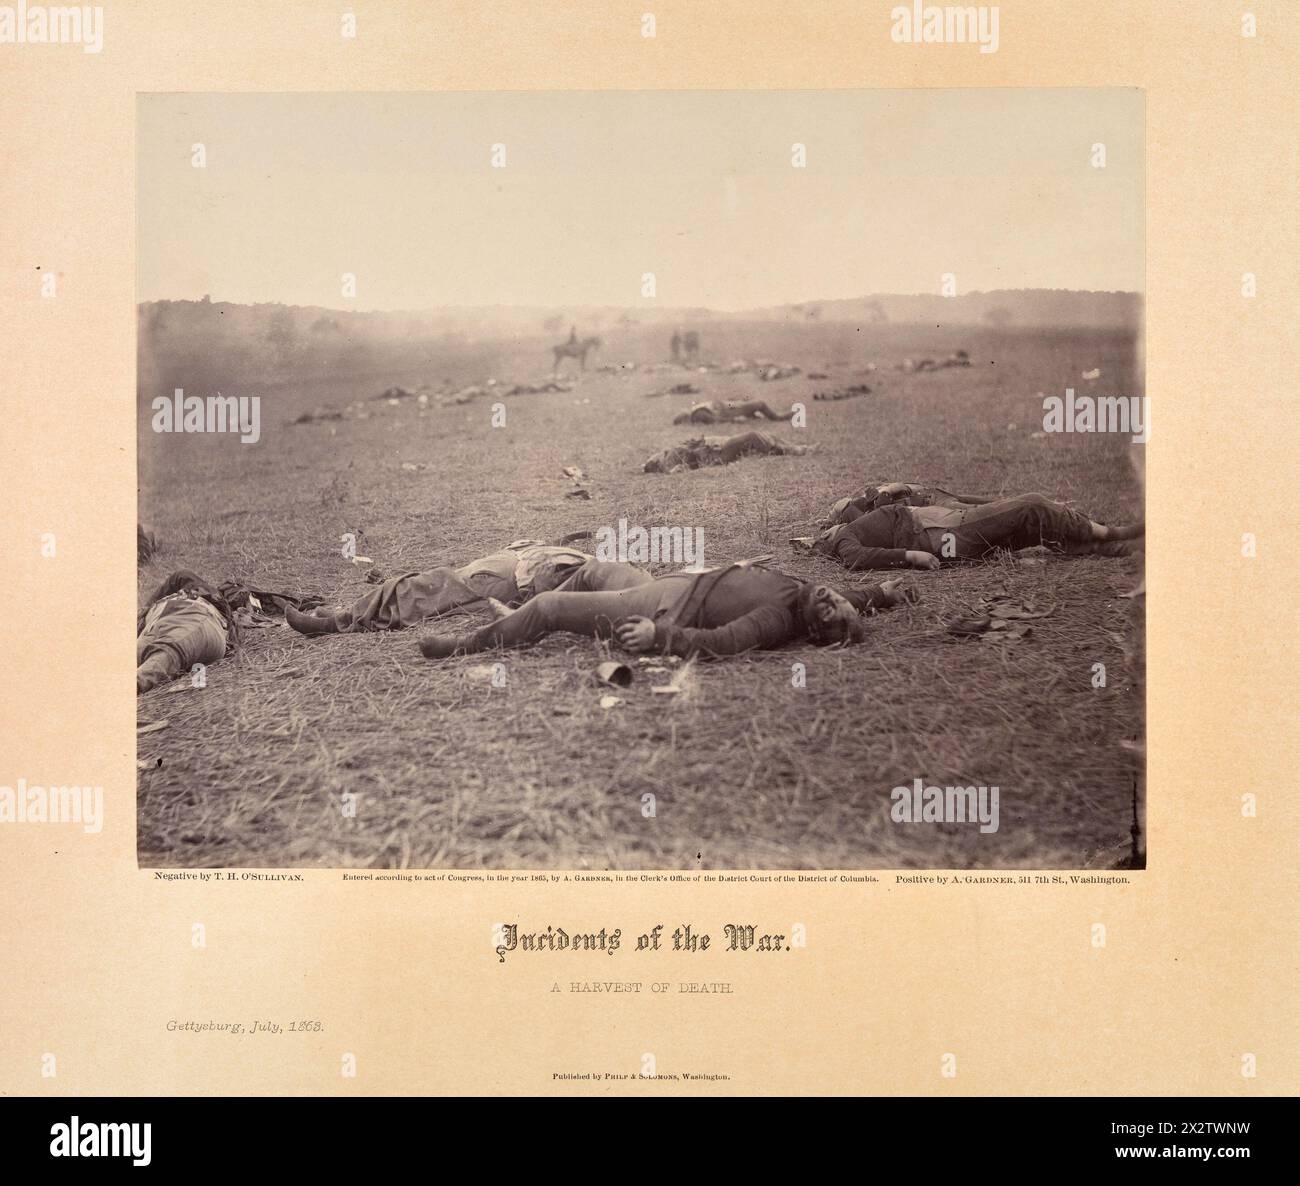 Vintage US Civile War Photography: 'A Harvest of death', showing battlefield with bodies of fallen soldiers.   From Alex Gardner series Incidents of the War, 1868 Stock Photo